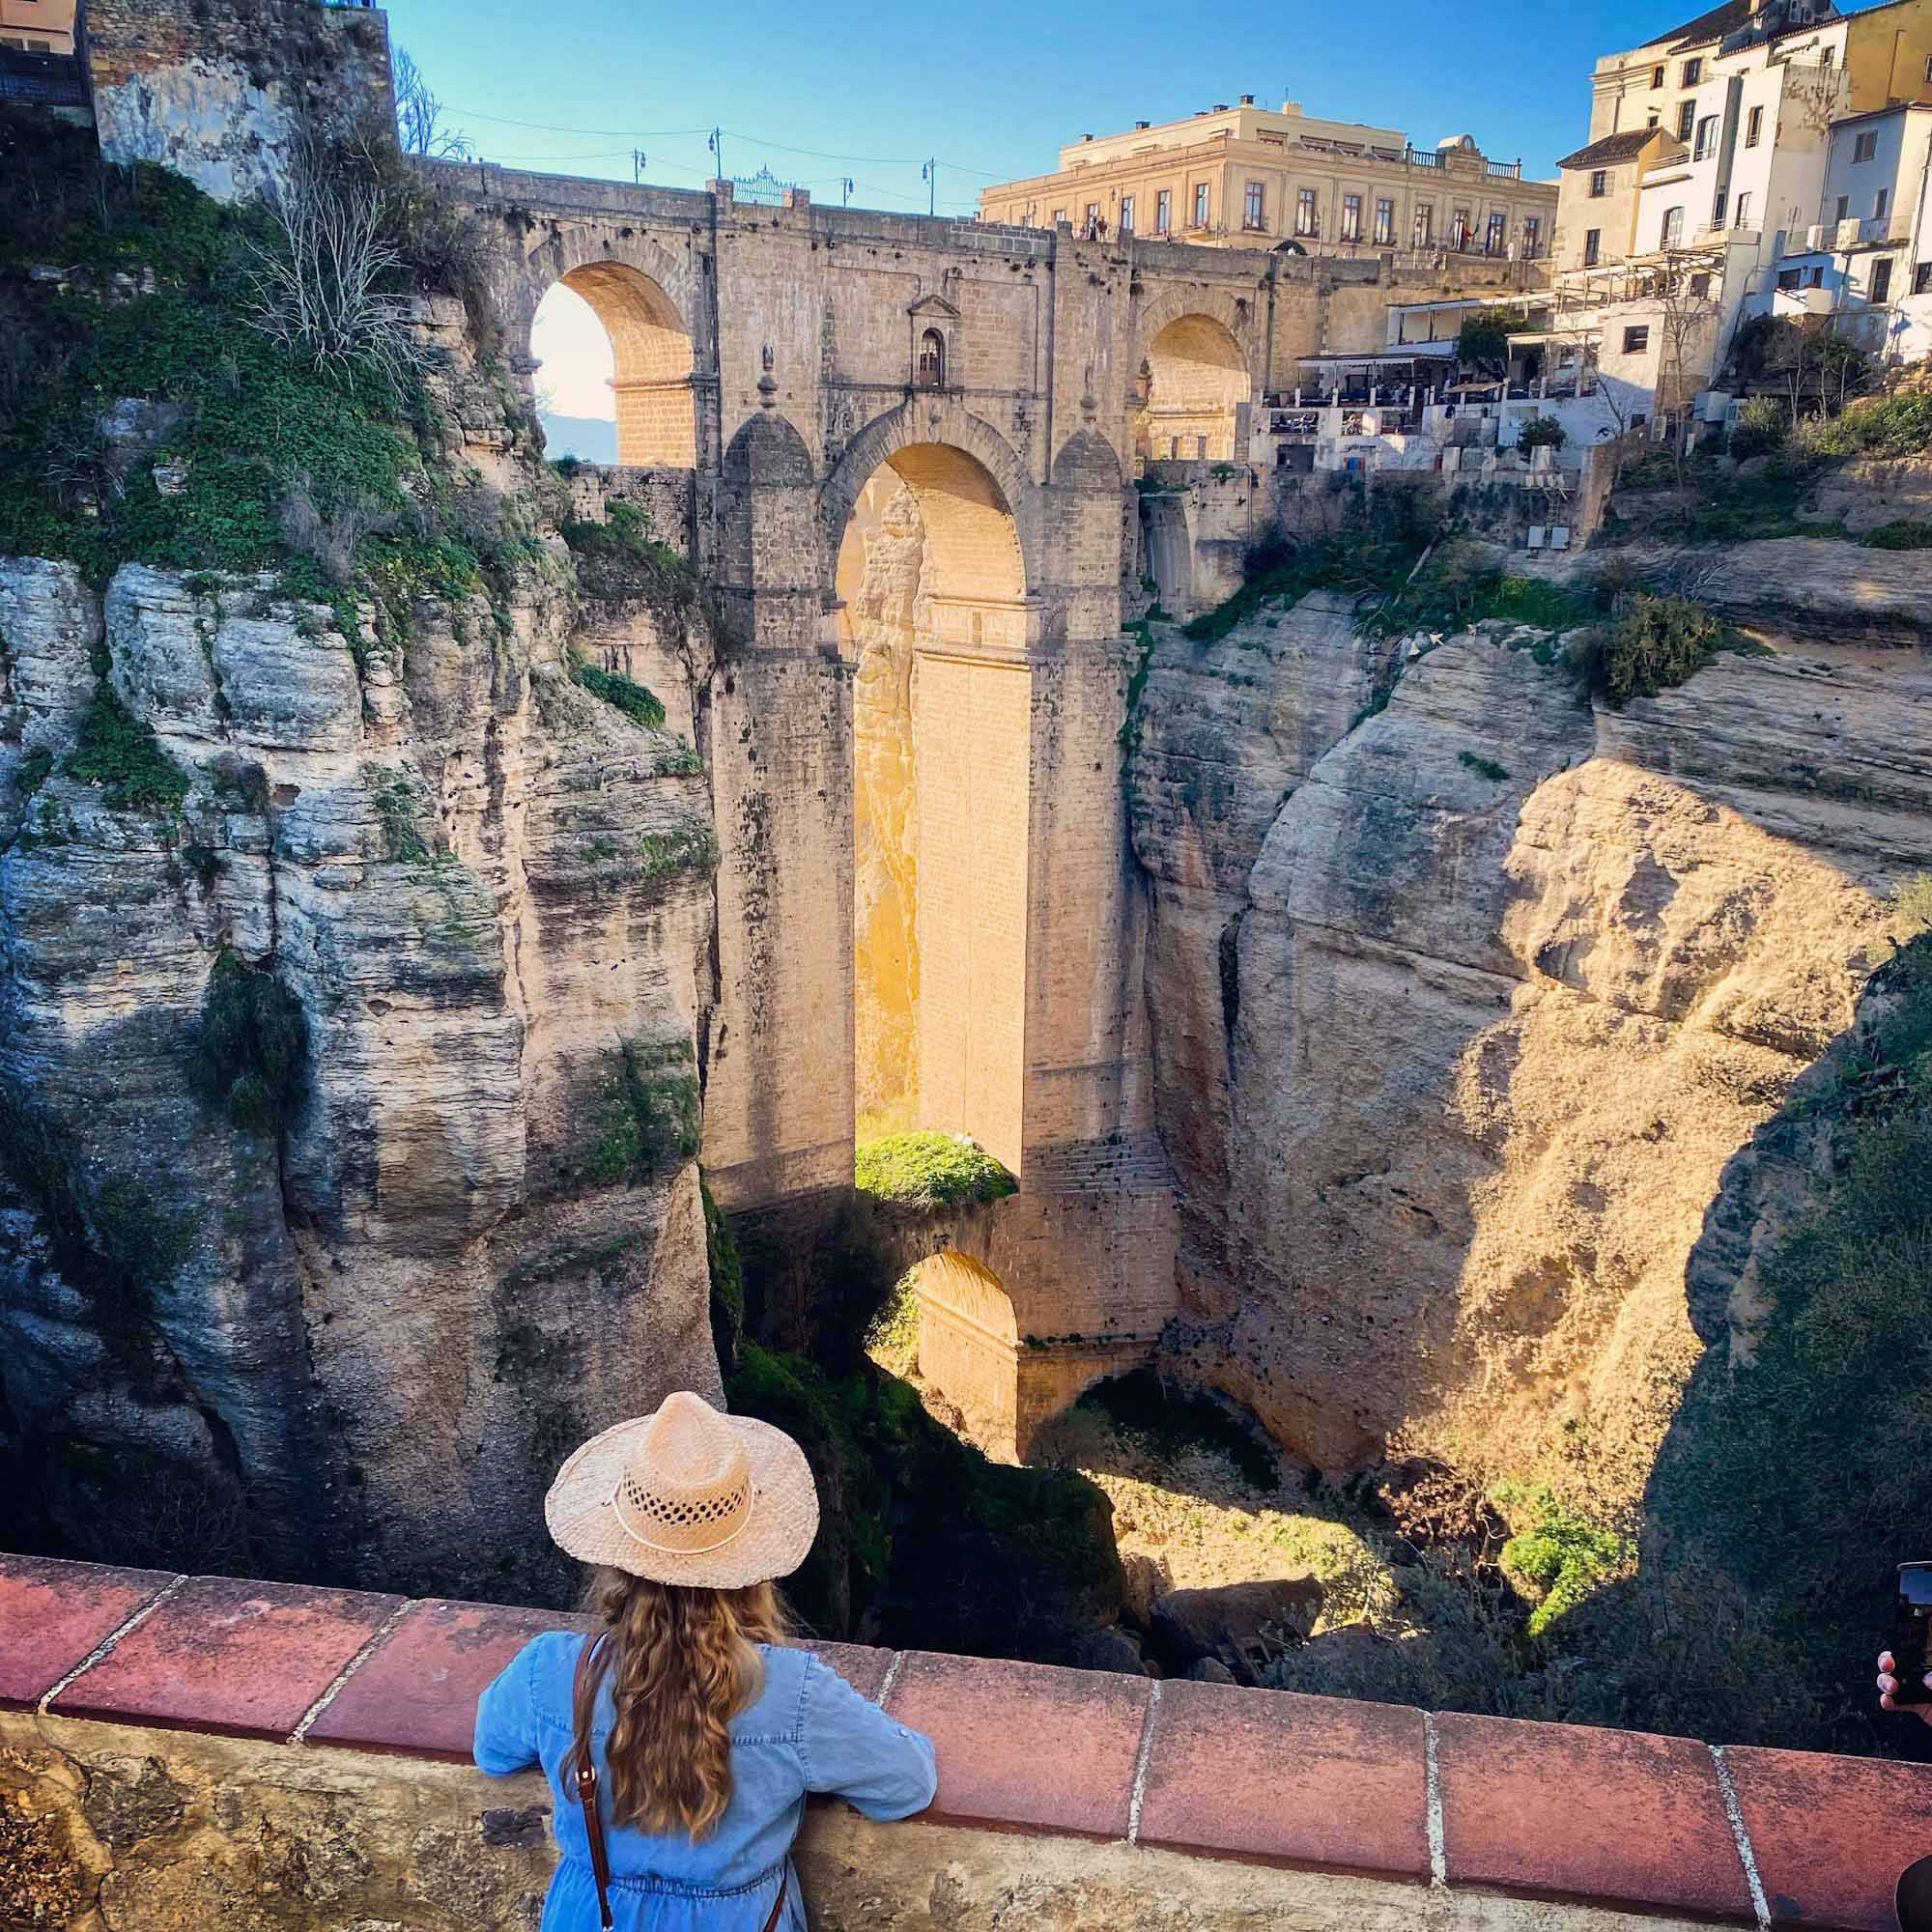 Lady stood at a viewpoint overlooking an impressive stone bridge spanning a canyon